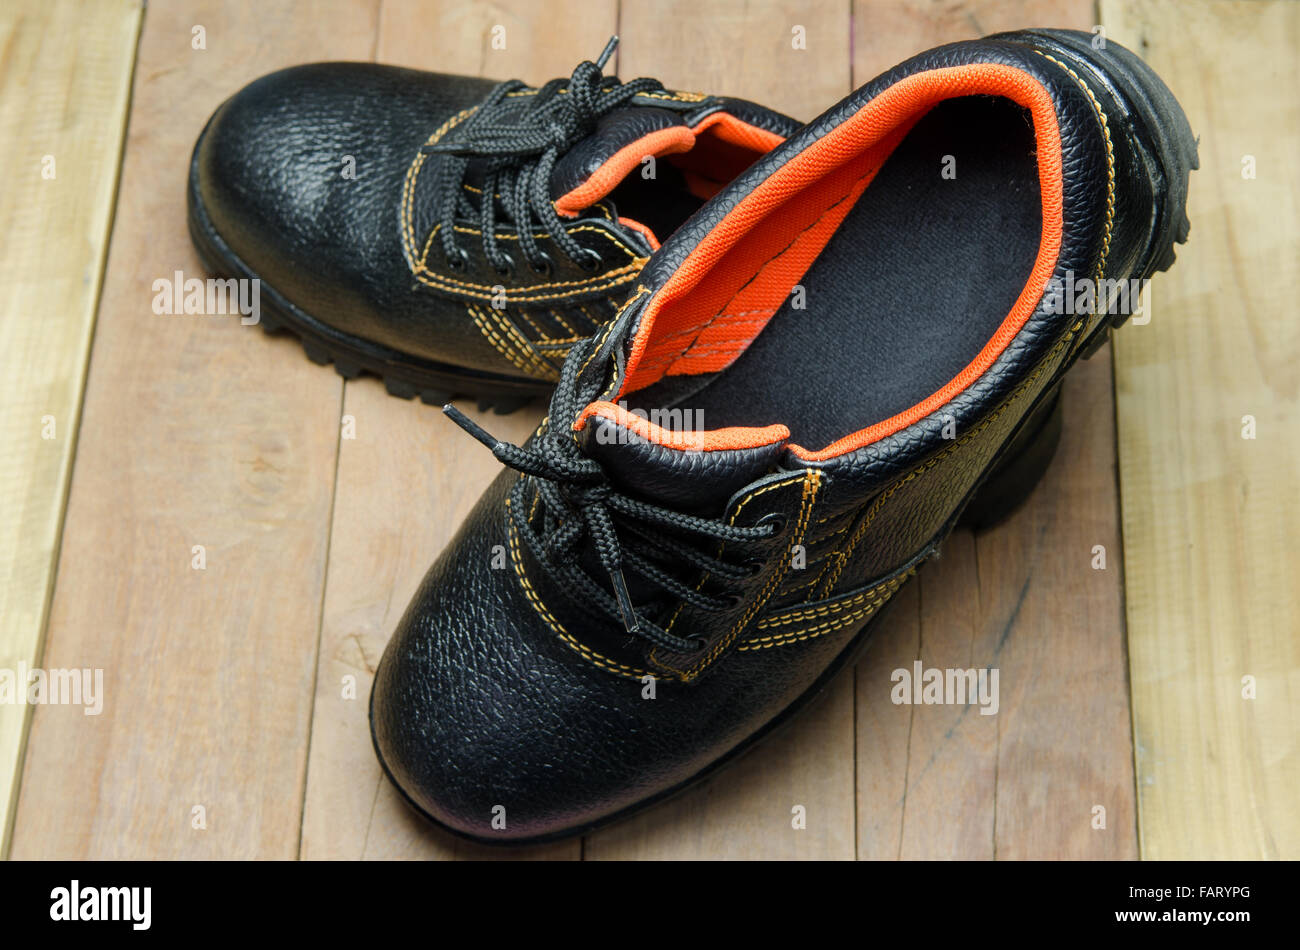 Black Steel Toe Safety of steel cap work boots Stock Photo - Alamy